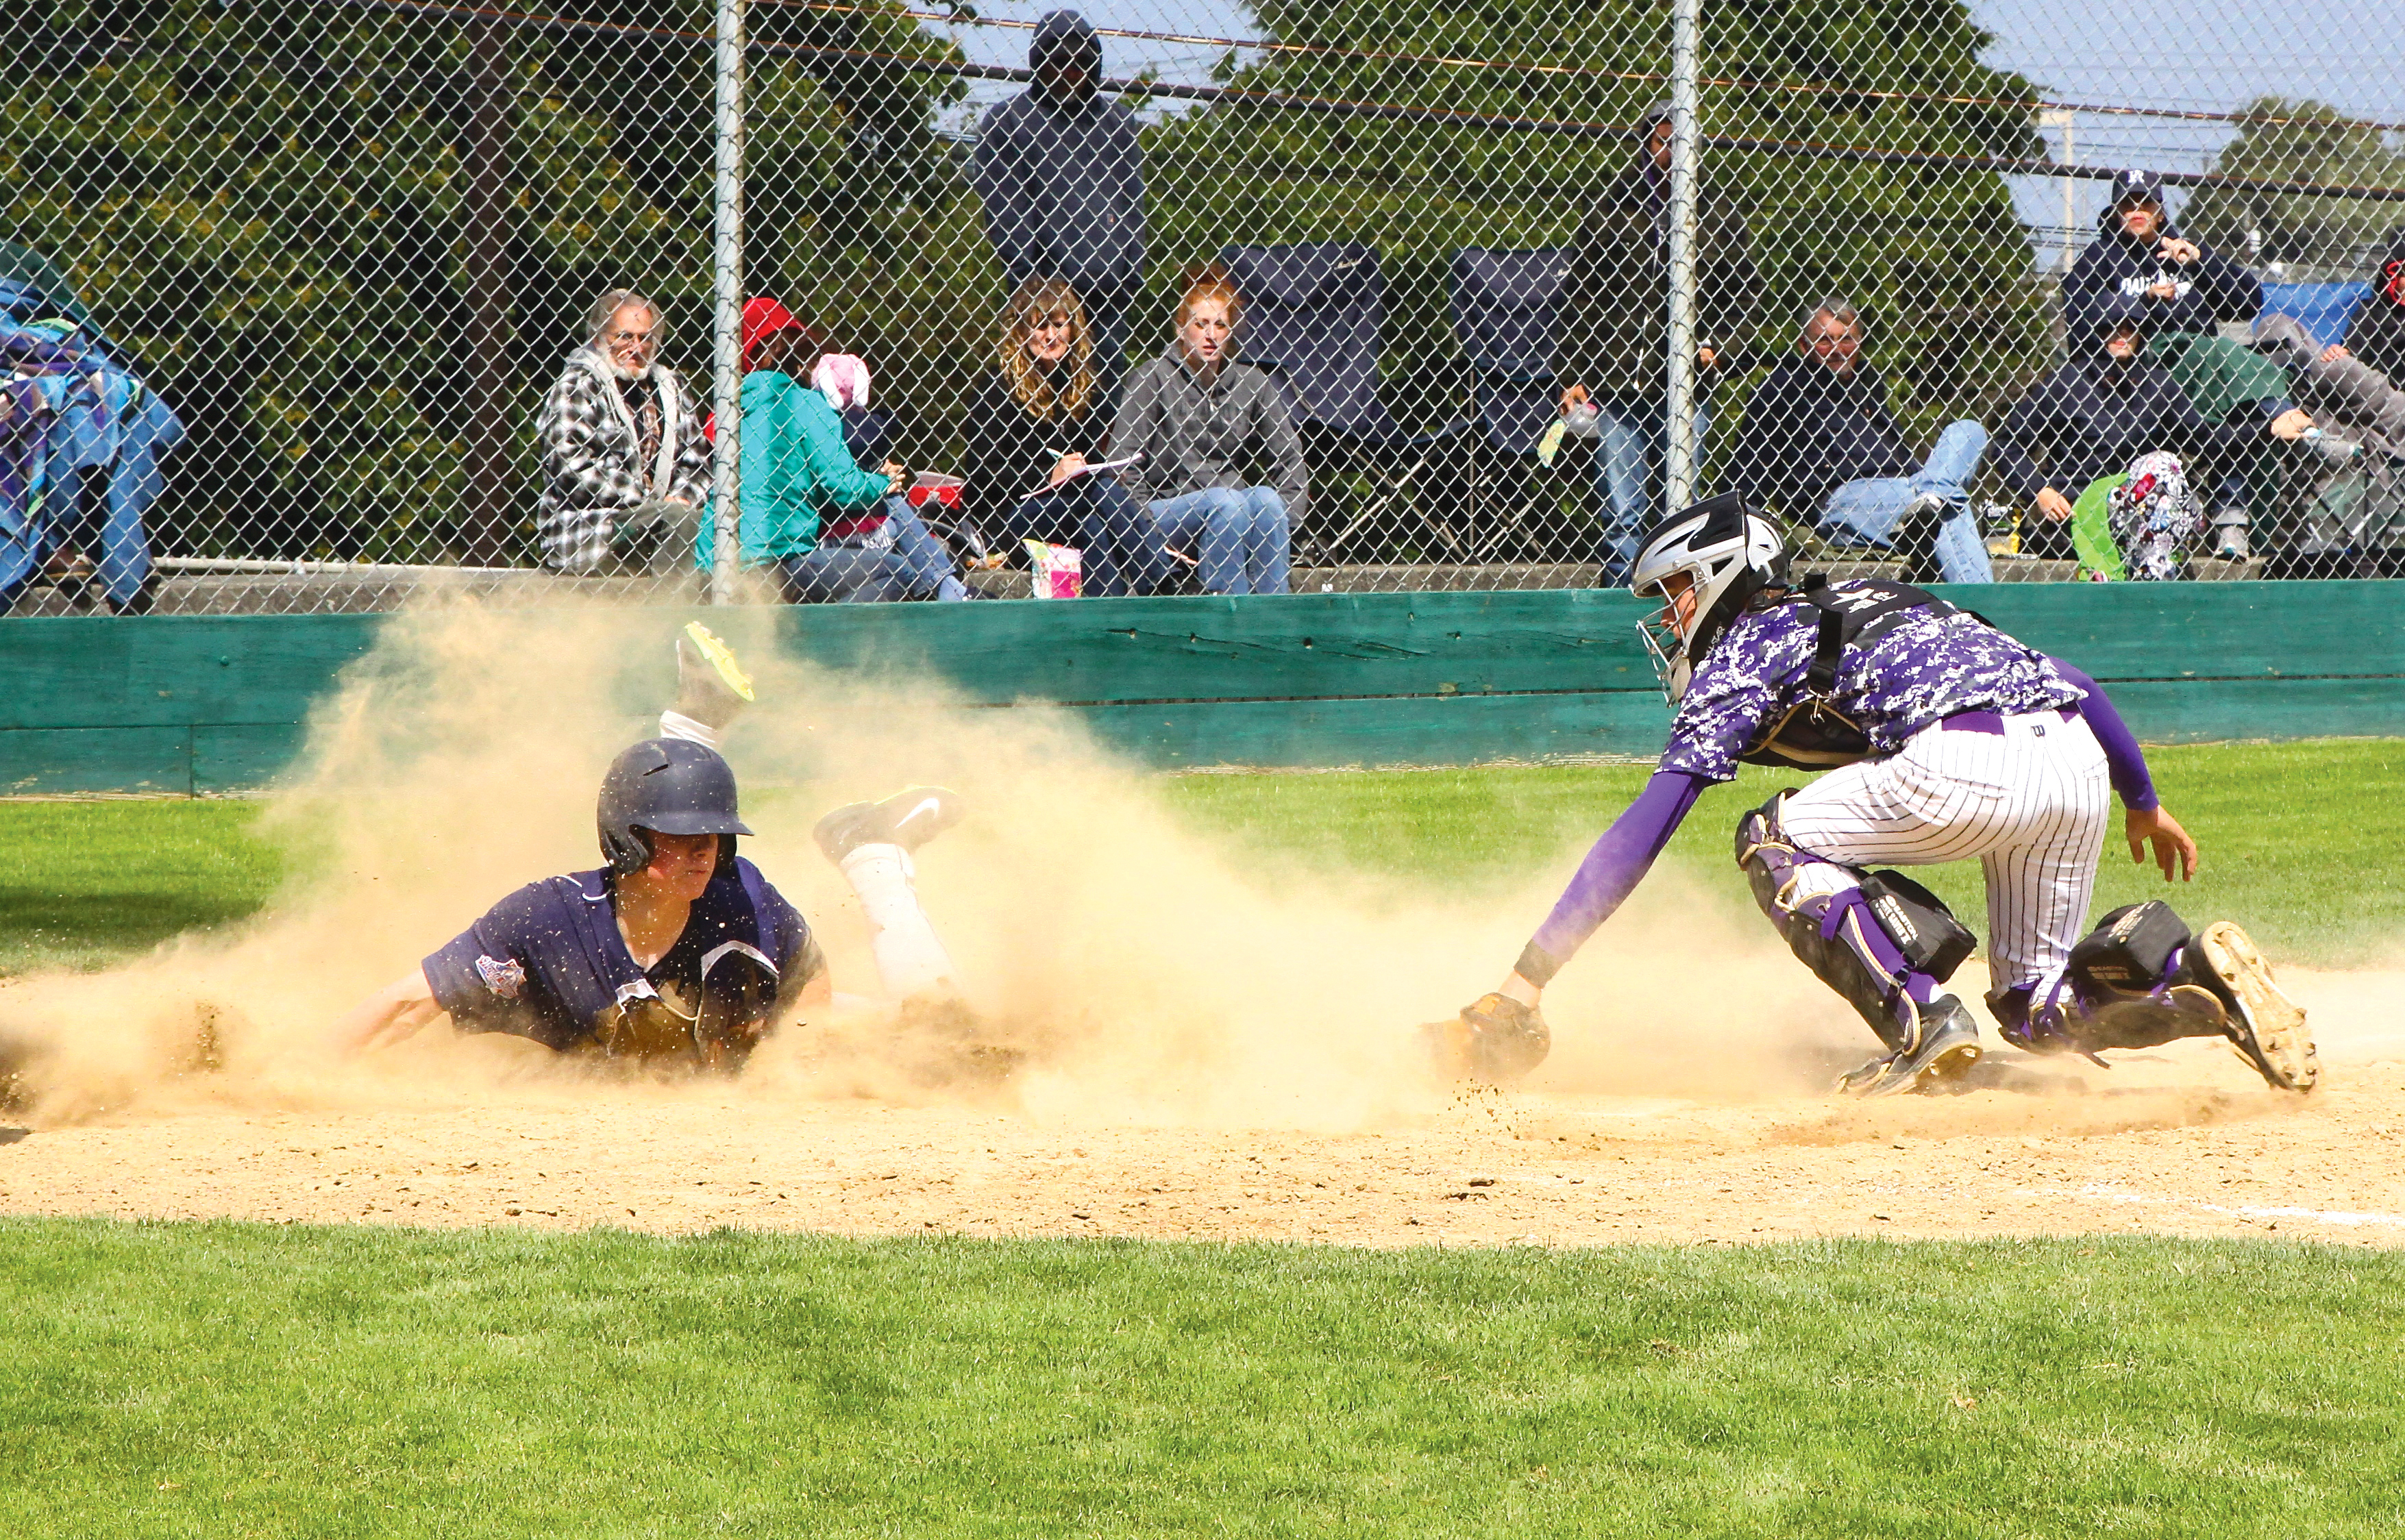 Wilder's Tanner Gochnour scores in a cloud of dust at home plate